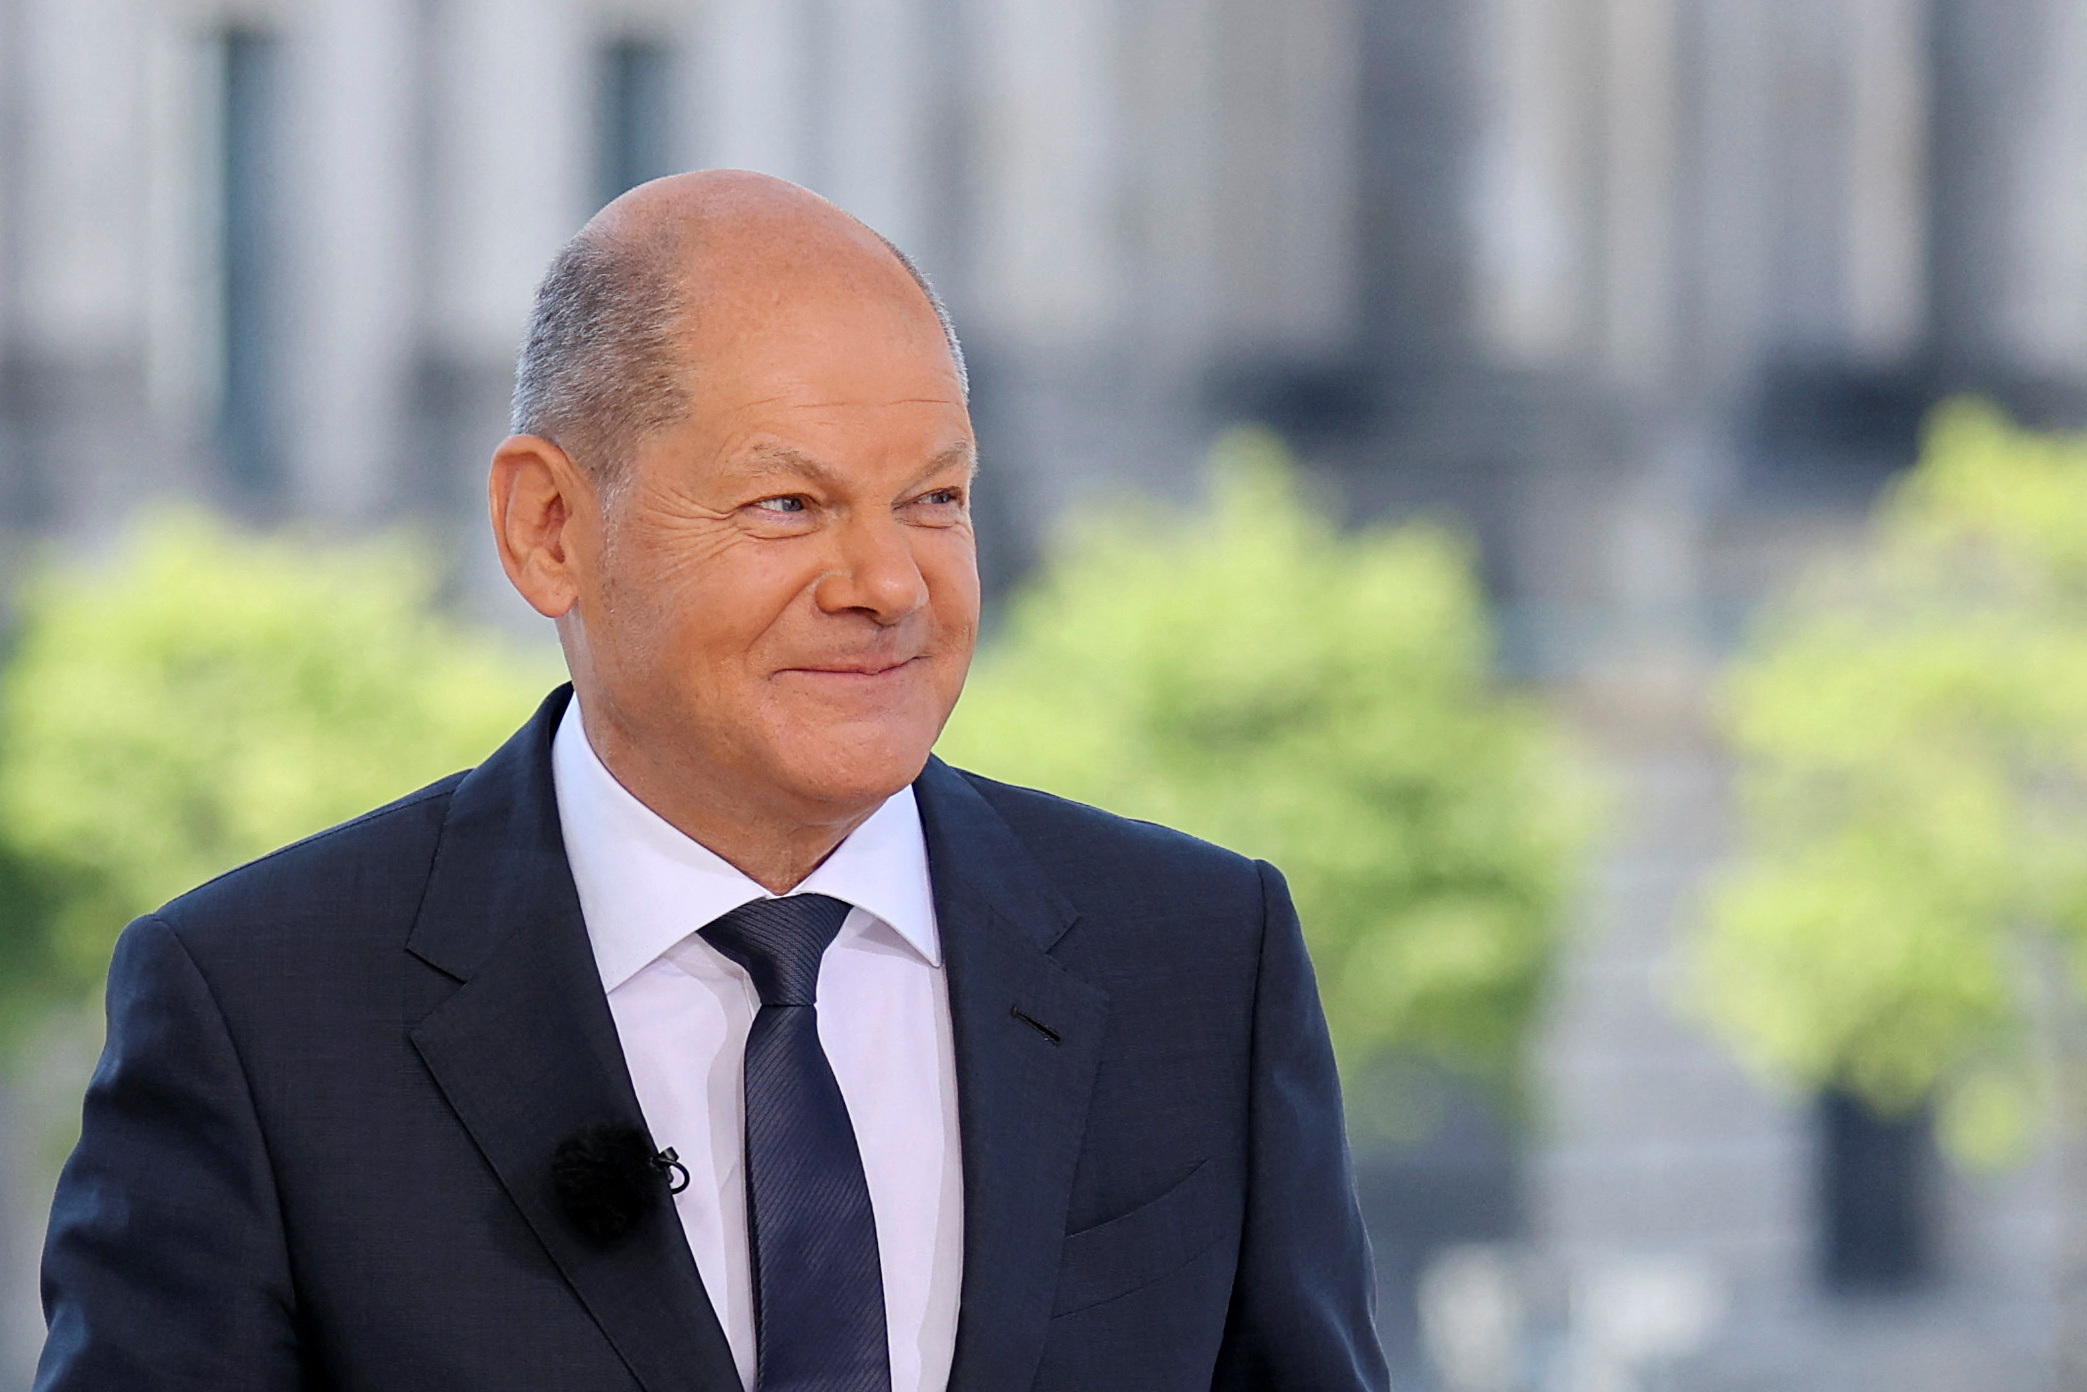 German Chancellor Olaf Scholz attends the ARD Sommerinterview in Berlin